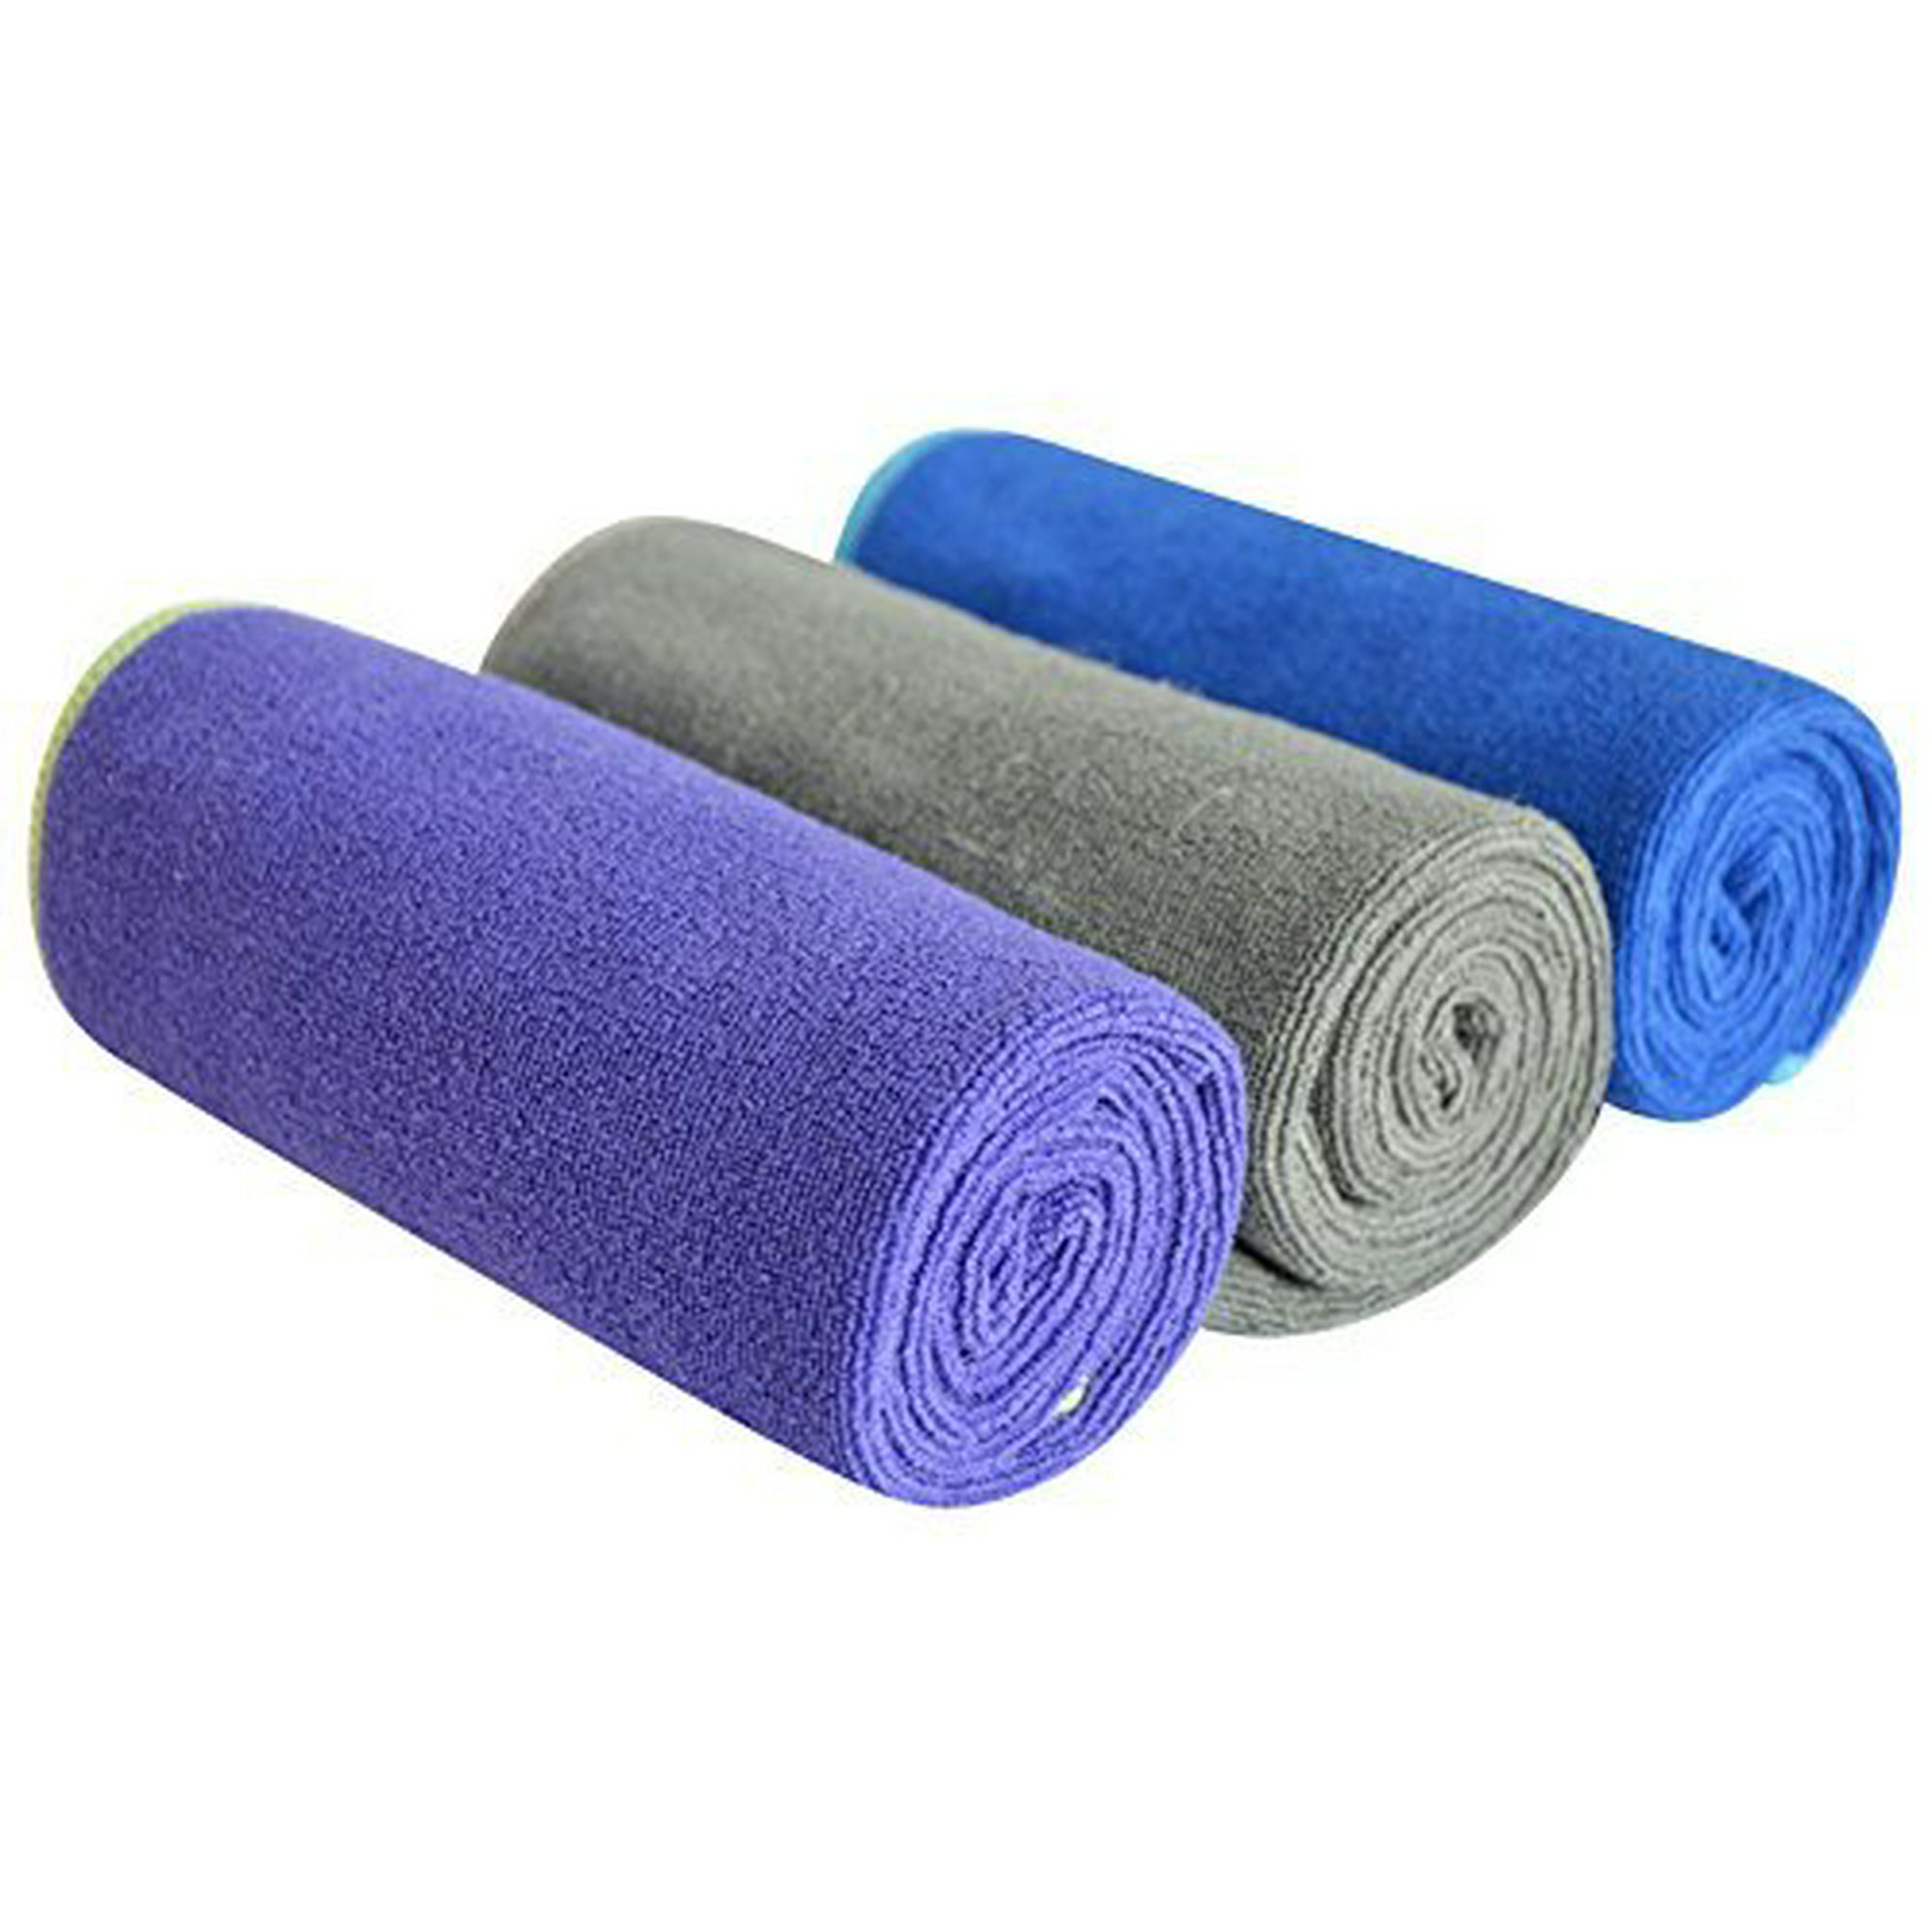 SINLAND Microfiber Gym Towels Sweat Workout Sports Fitness Towel Fast Drying 3 Pack 16 Inch X 32 Inch | Walmart Canada